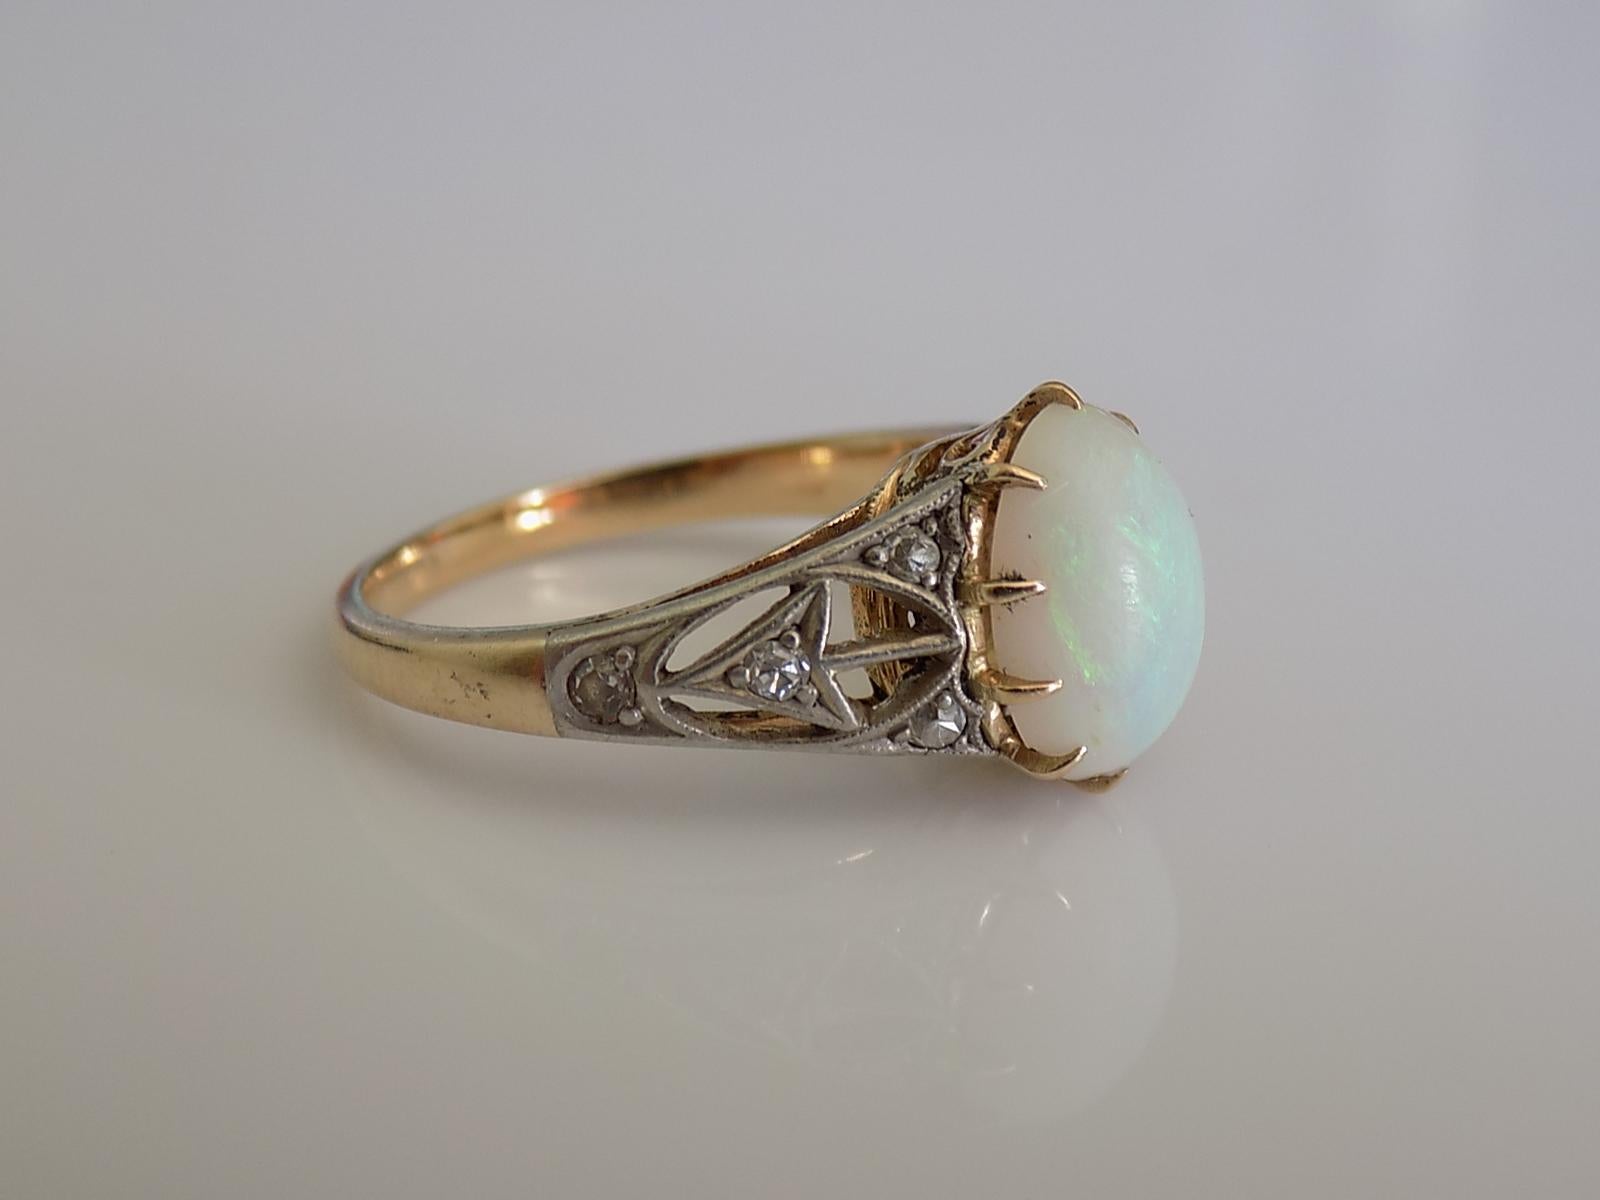 A Gorgeous Art Deco c.1920s/30s 18 Carat Gold, Australian Opal and Diamond dress ring. 

Size J UK, 5 US can be sized.

Opal 10mm x 7mm.
Unmarked, tested 18 Carat Gold.

The ring in excellent condition for the age, the stones without any damage and